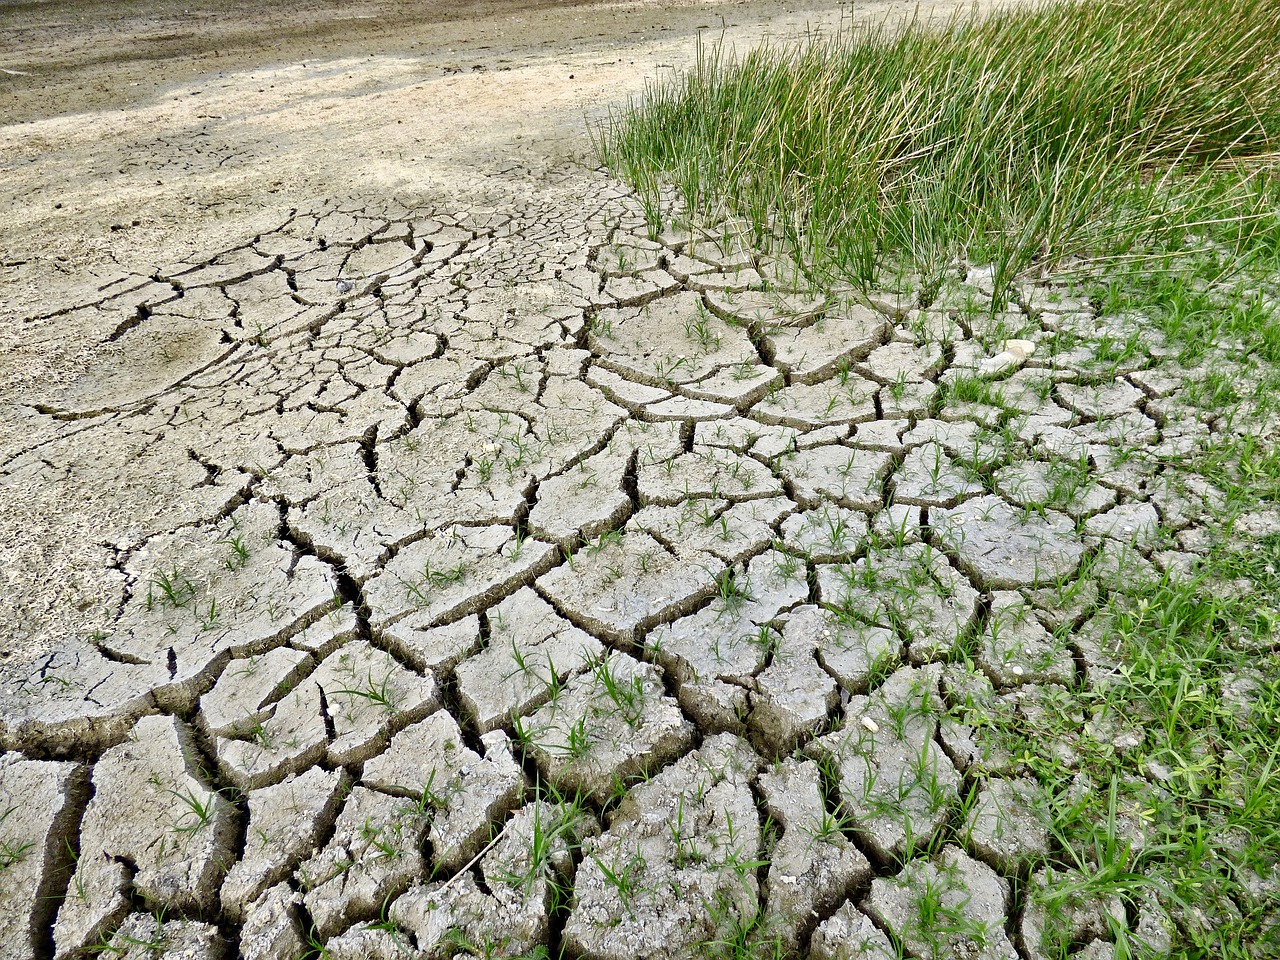 Updated: Drought Alert Issued in Hungary